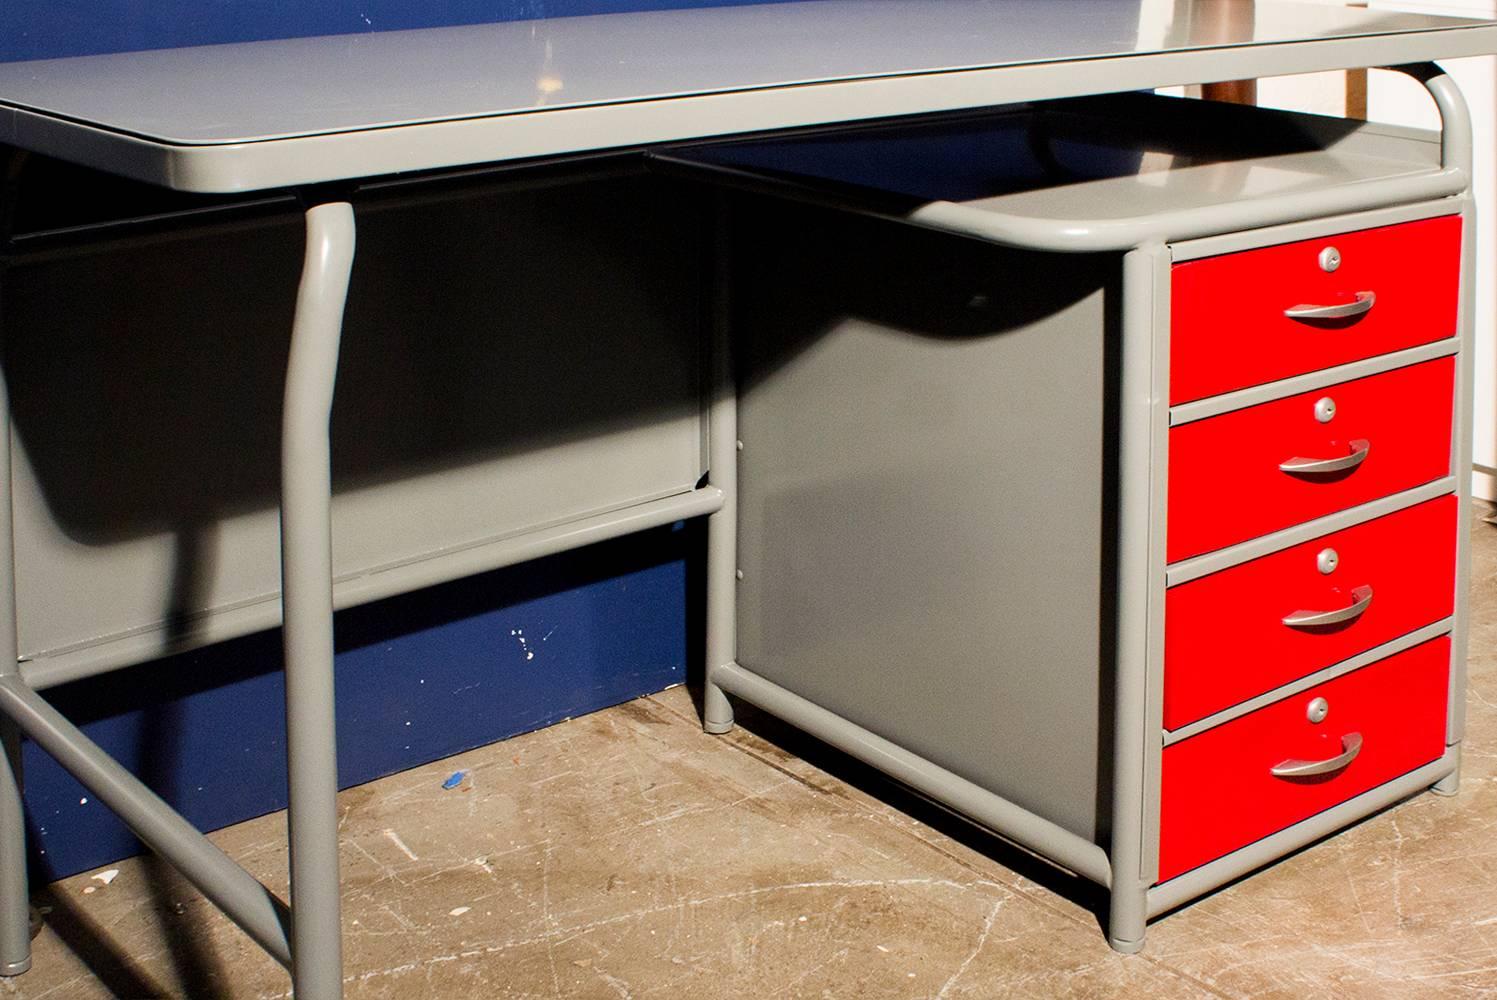 Stellar 1950s Industrial-era school desk by American Seating. The single pedestal base features 4 locking drawers and an open storage cubby. Freshly powder-coated in grey and red with original brushed aluminum hardware. An equally perfect retail